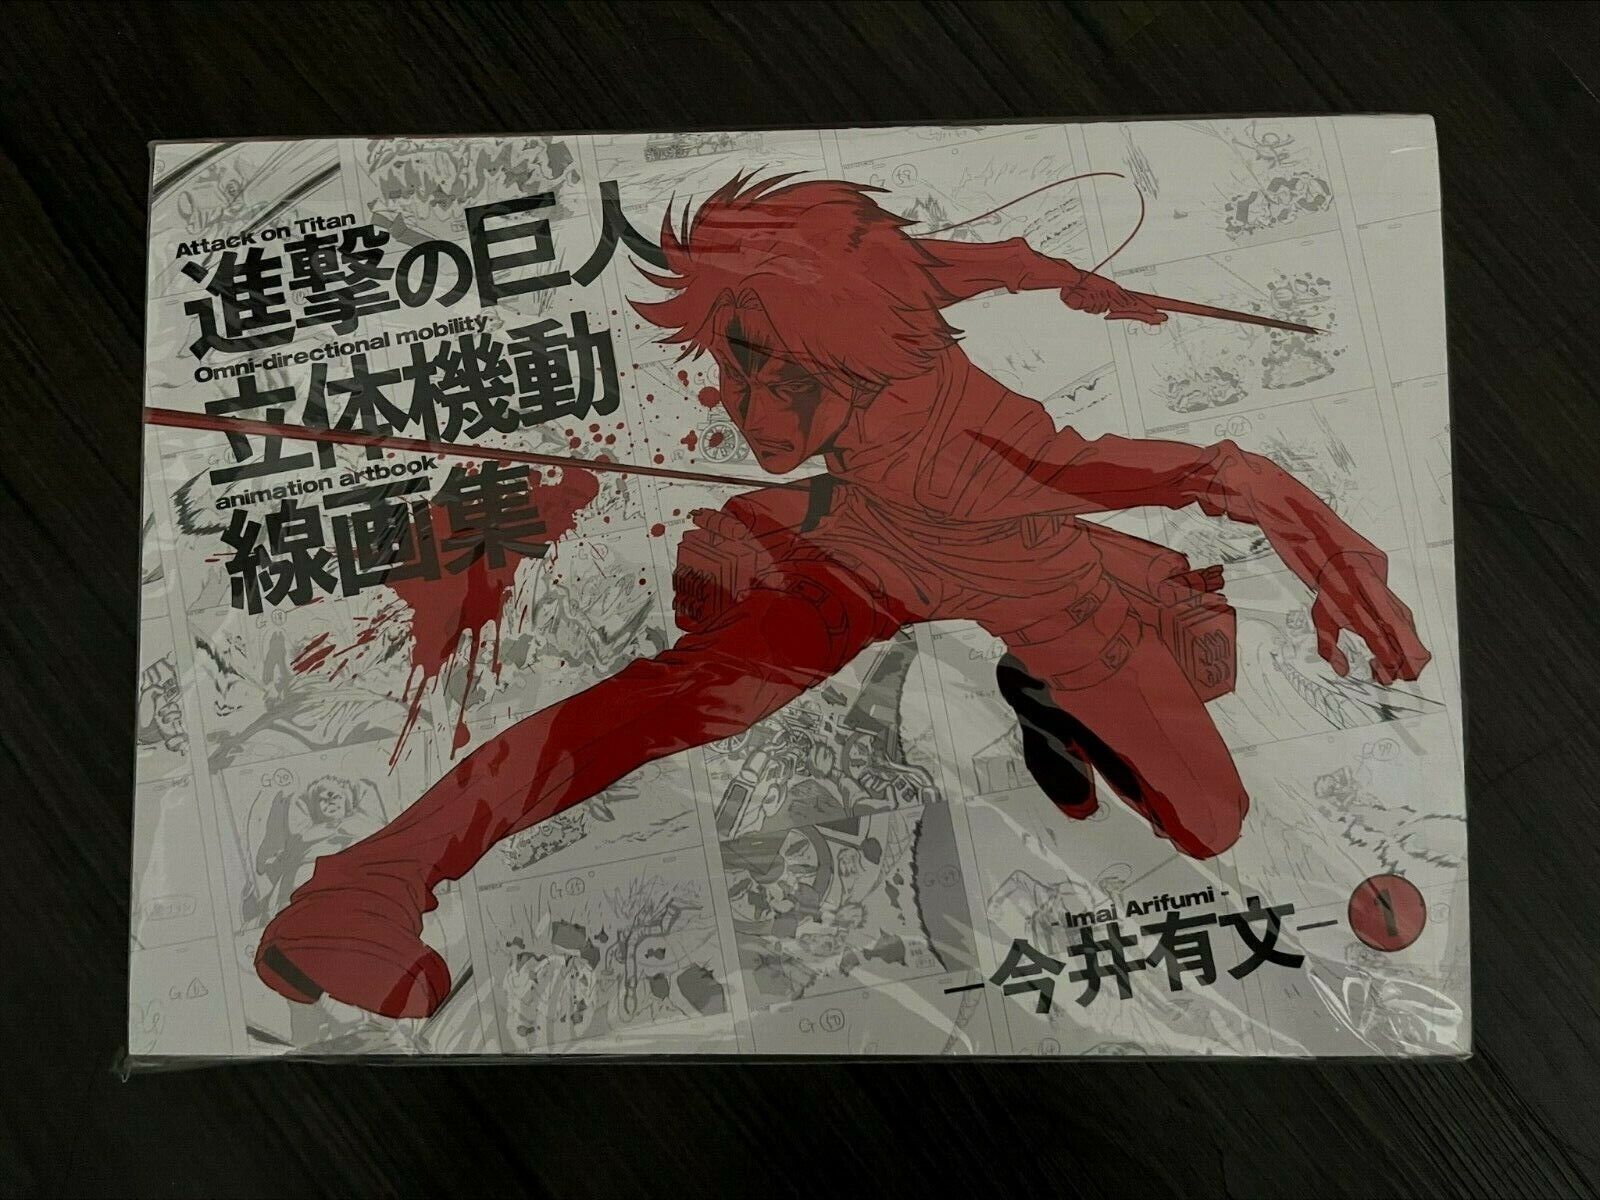 [US SELLER] Attack on Titan WIT Omni-directional Mobility Animation Art Book